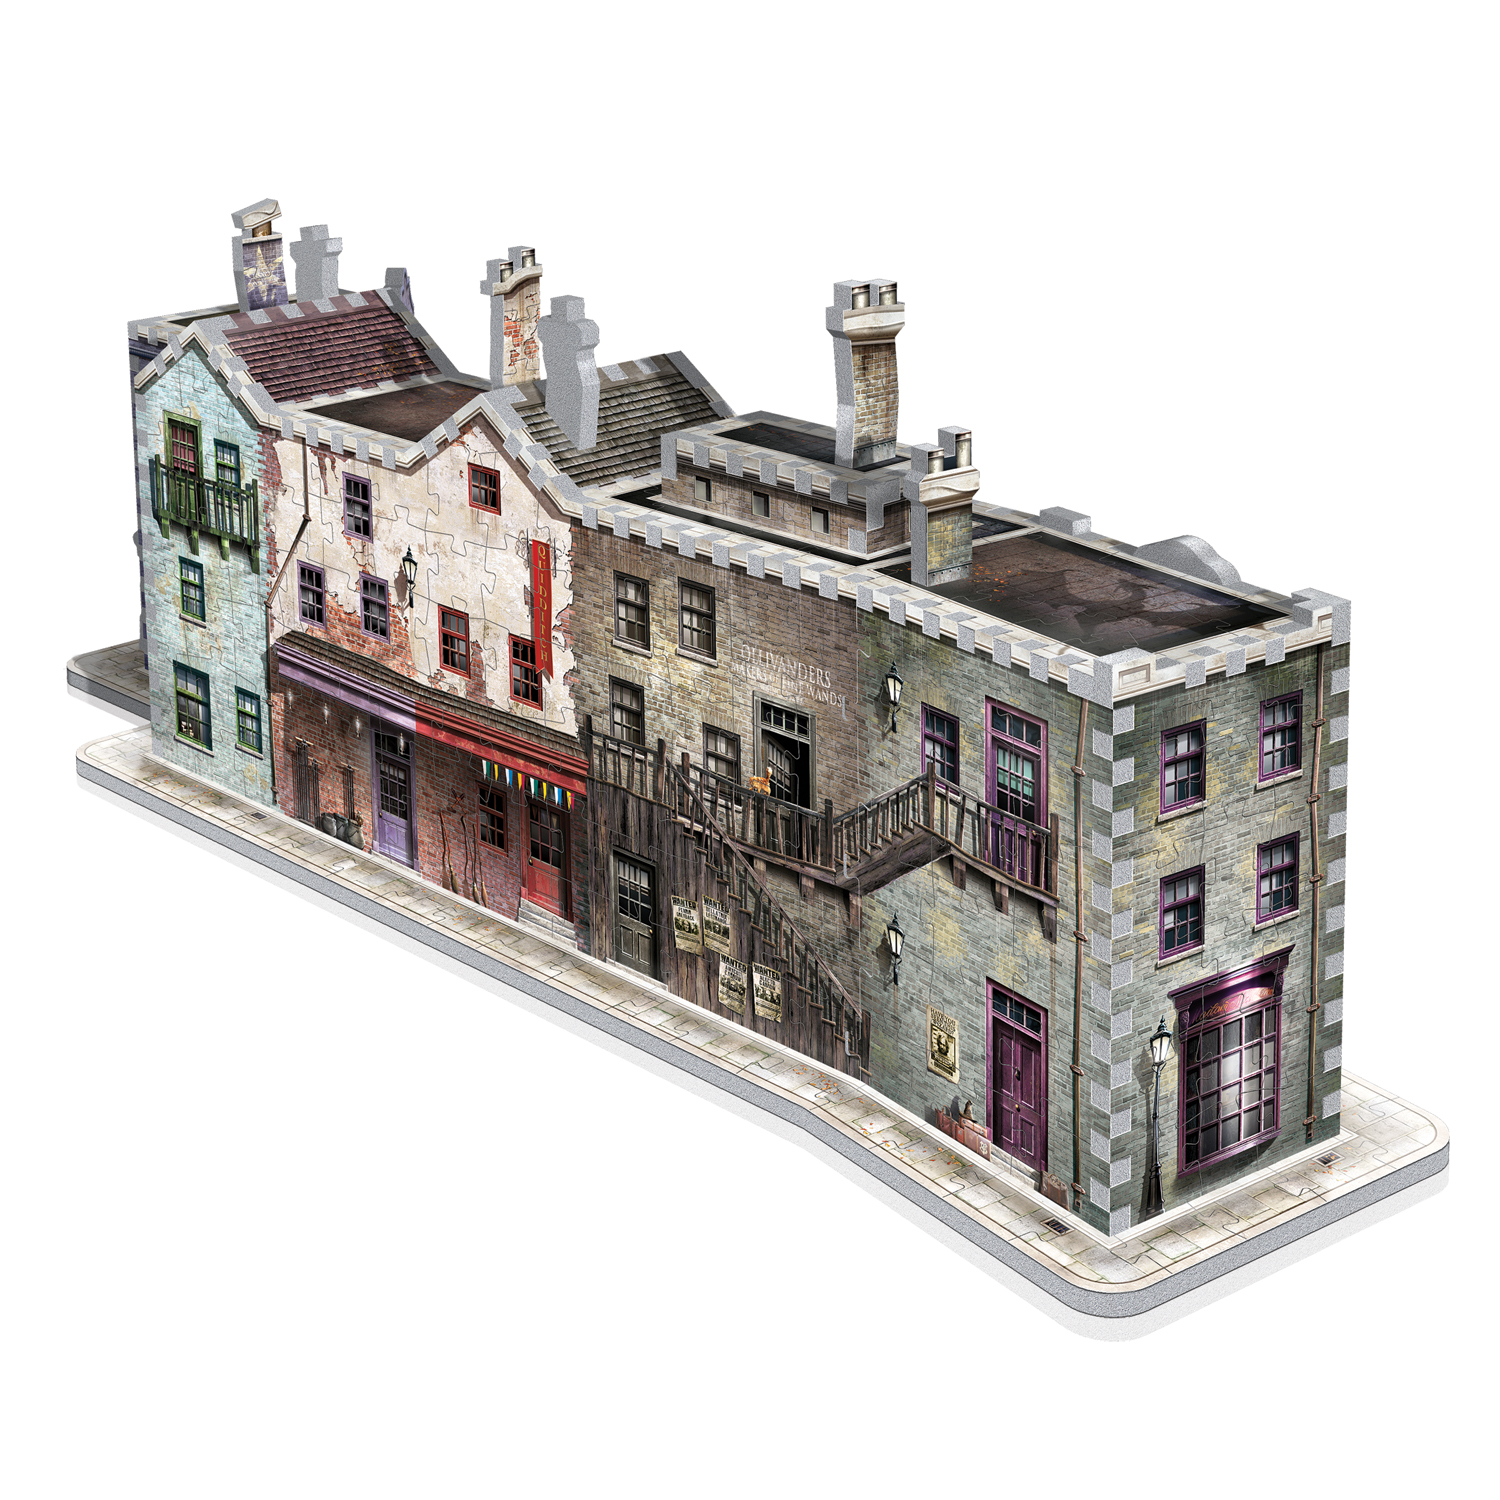 Harry Potter Hogwarts Express and Diagon Alley 3D Puzzle